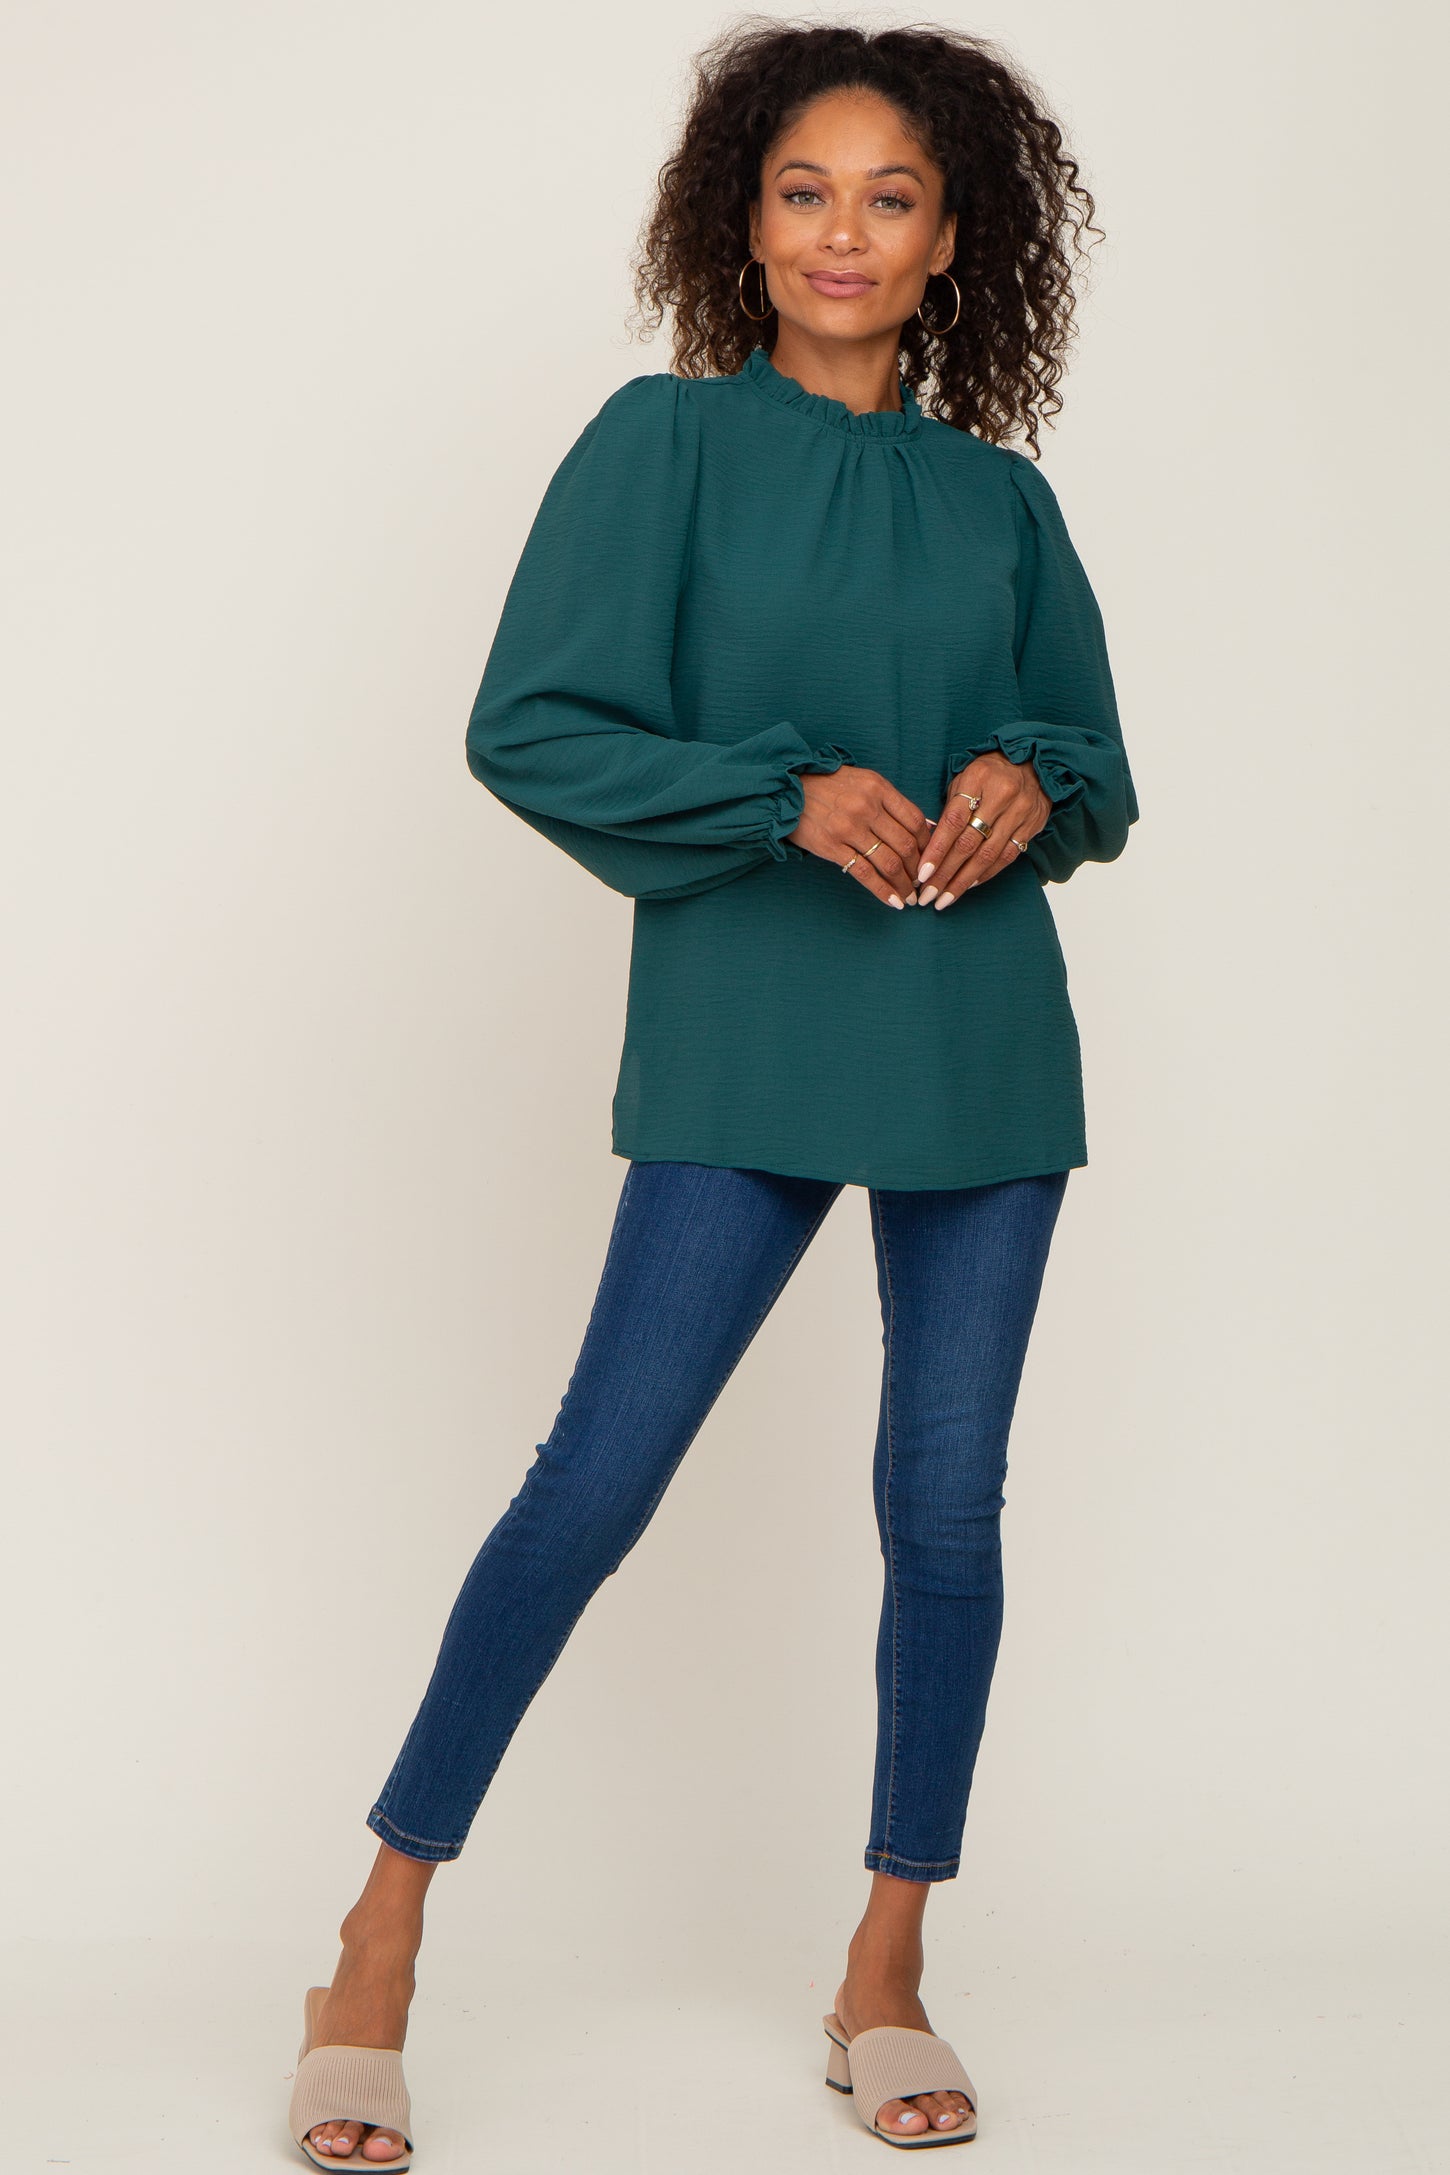 Forest Green Ruffle Neck Long Sleeve Blouse